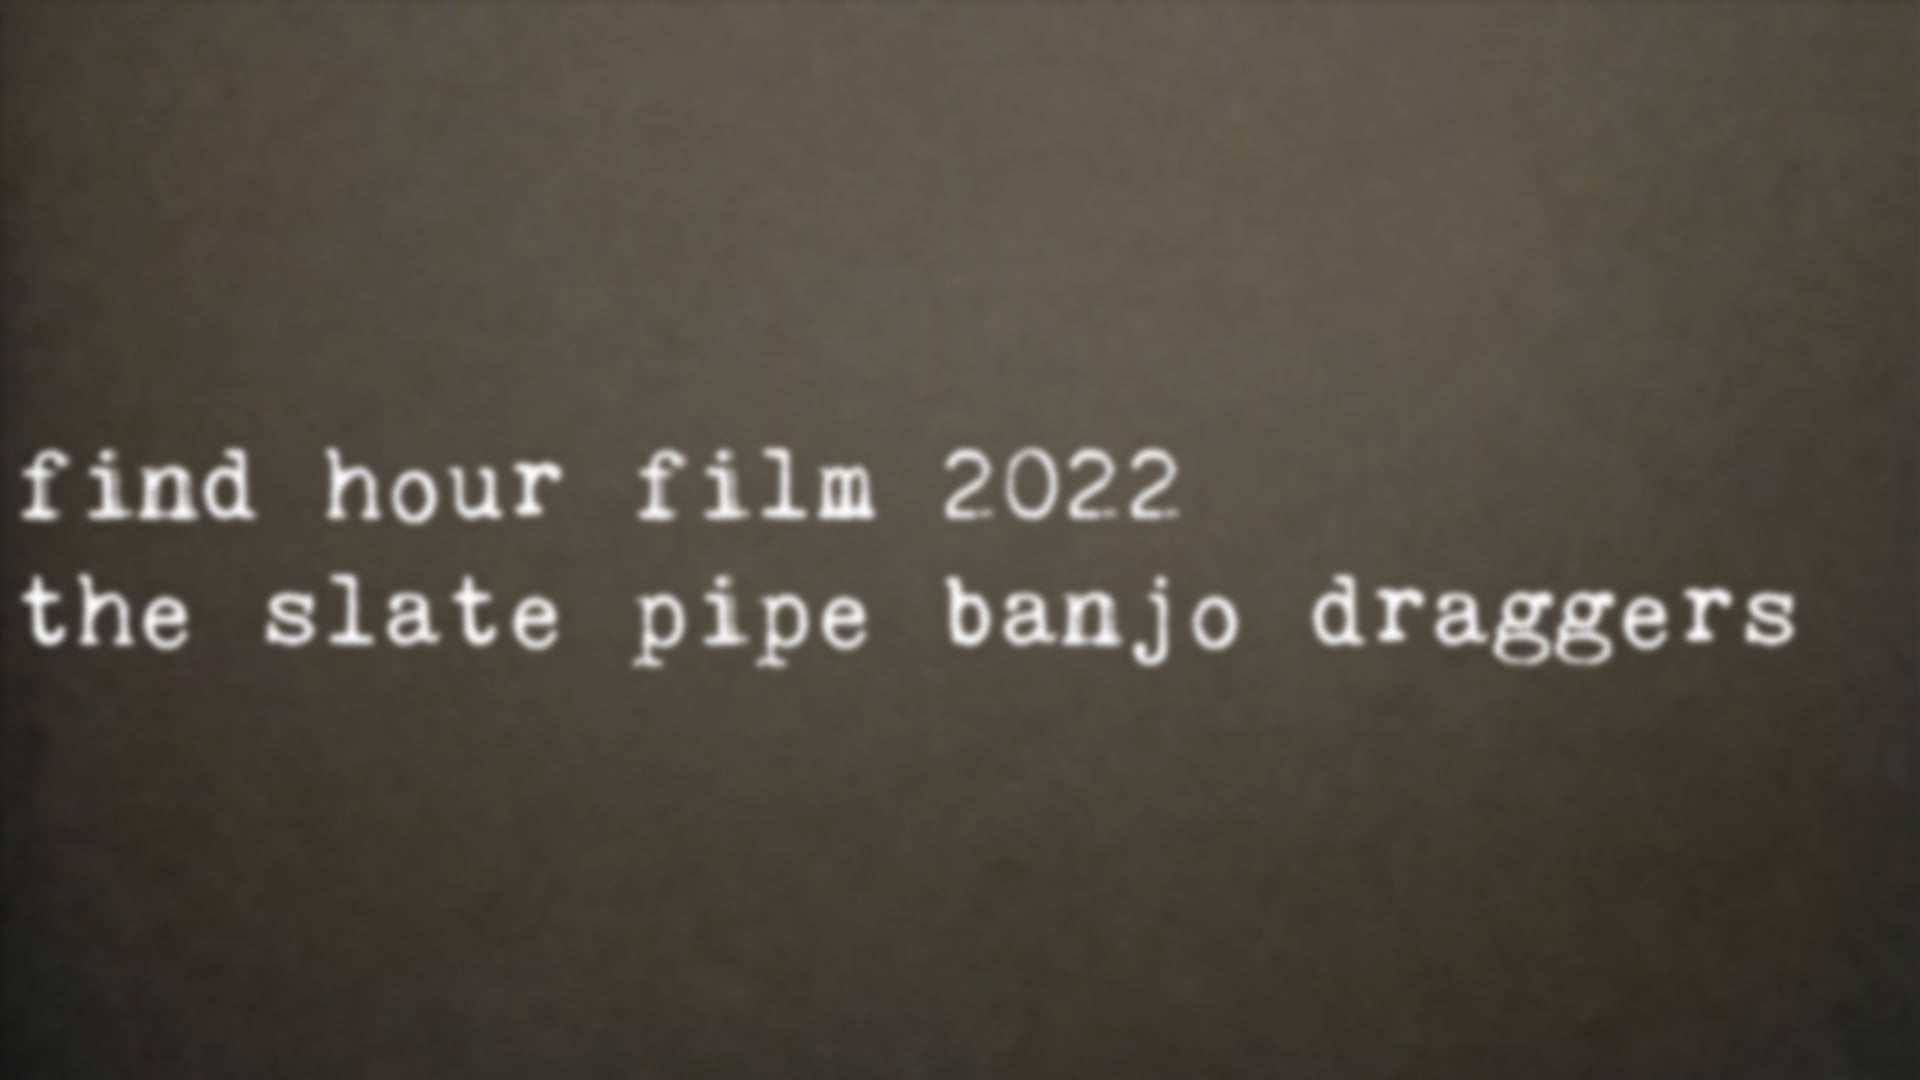 the slate pipe banjo draggers - find hour film 2022